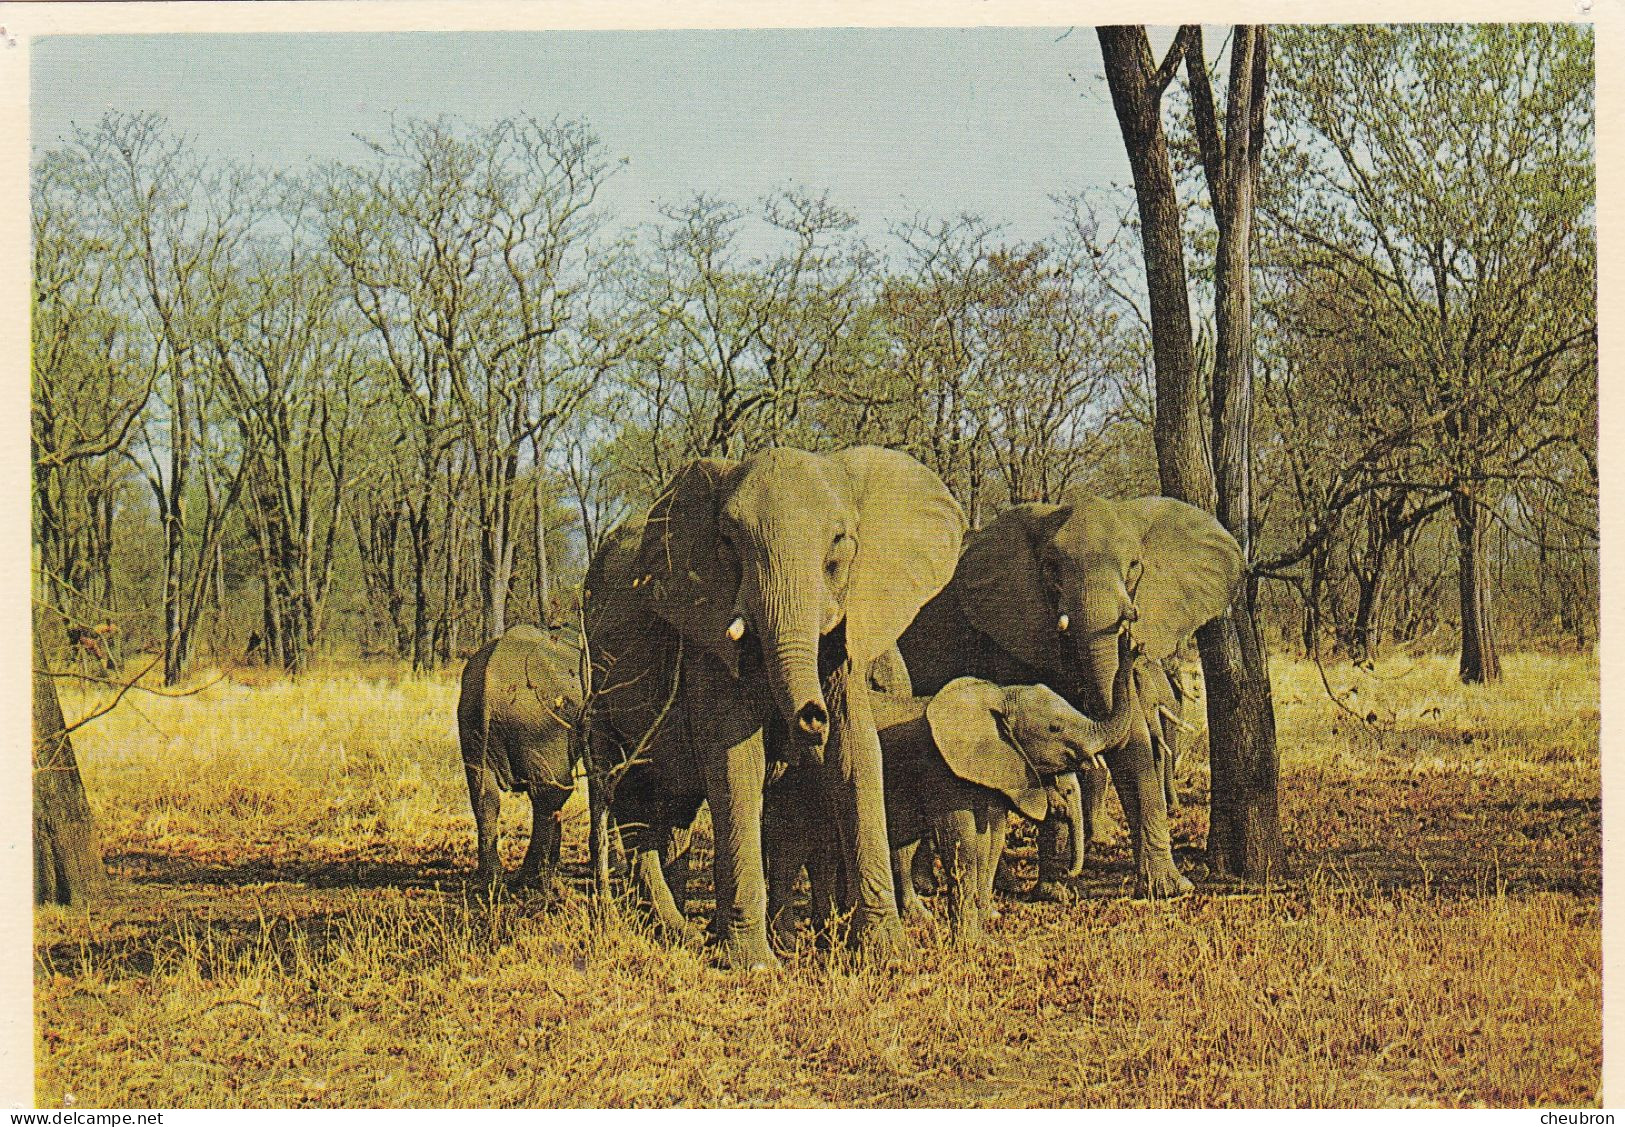 ANIMAUX & FAUNE.  CPSM. ELEPHANTS."HERD OF ELEPHANTS AND THEIR CALVES "  AFRIQUE DU SUD. NATURAL GAME RESERVES - Olifanten